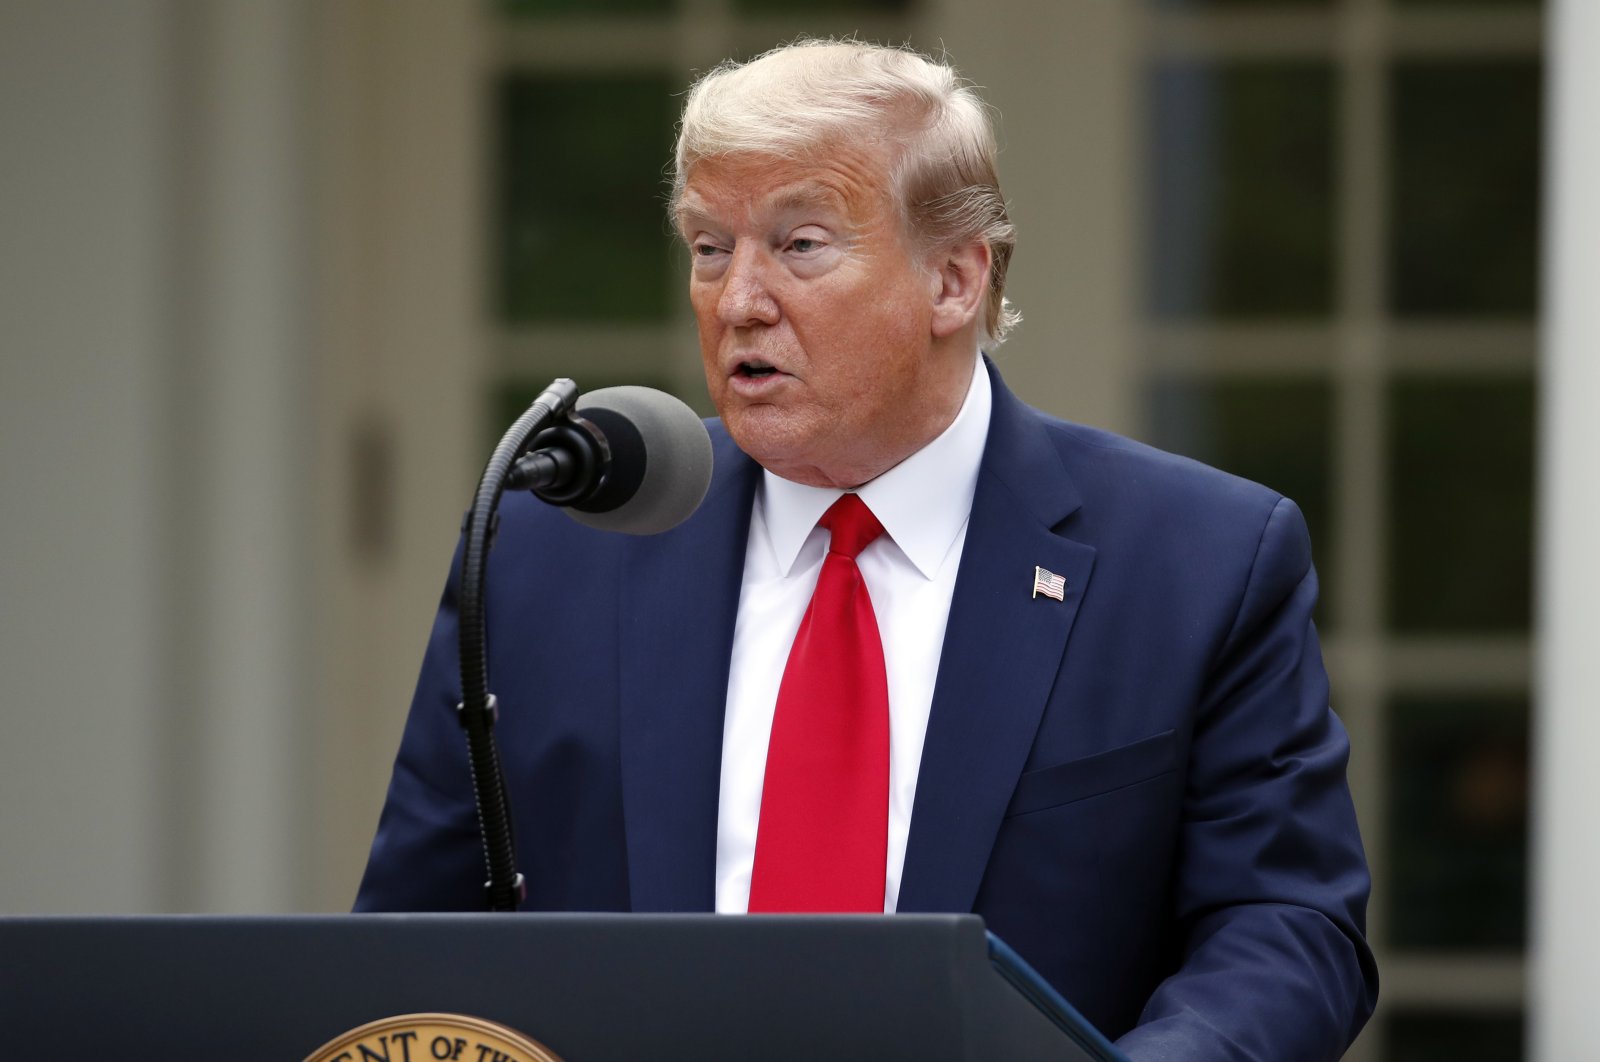 President Donald Trump speaks about the coronavirus in the Rose Garden of the White House, Tuesday, April 14, 2020, in Washington. (AP Photo)